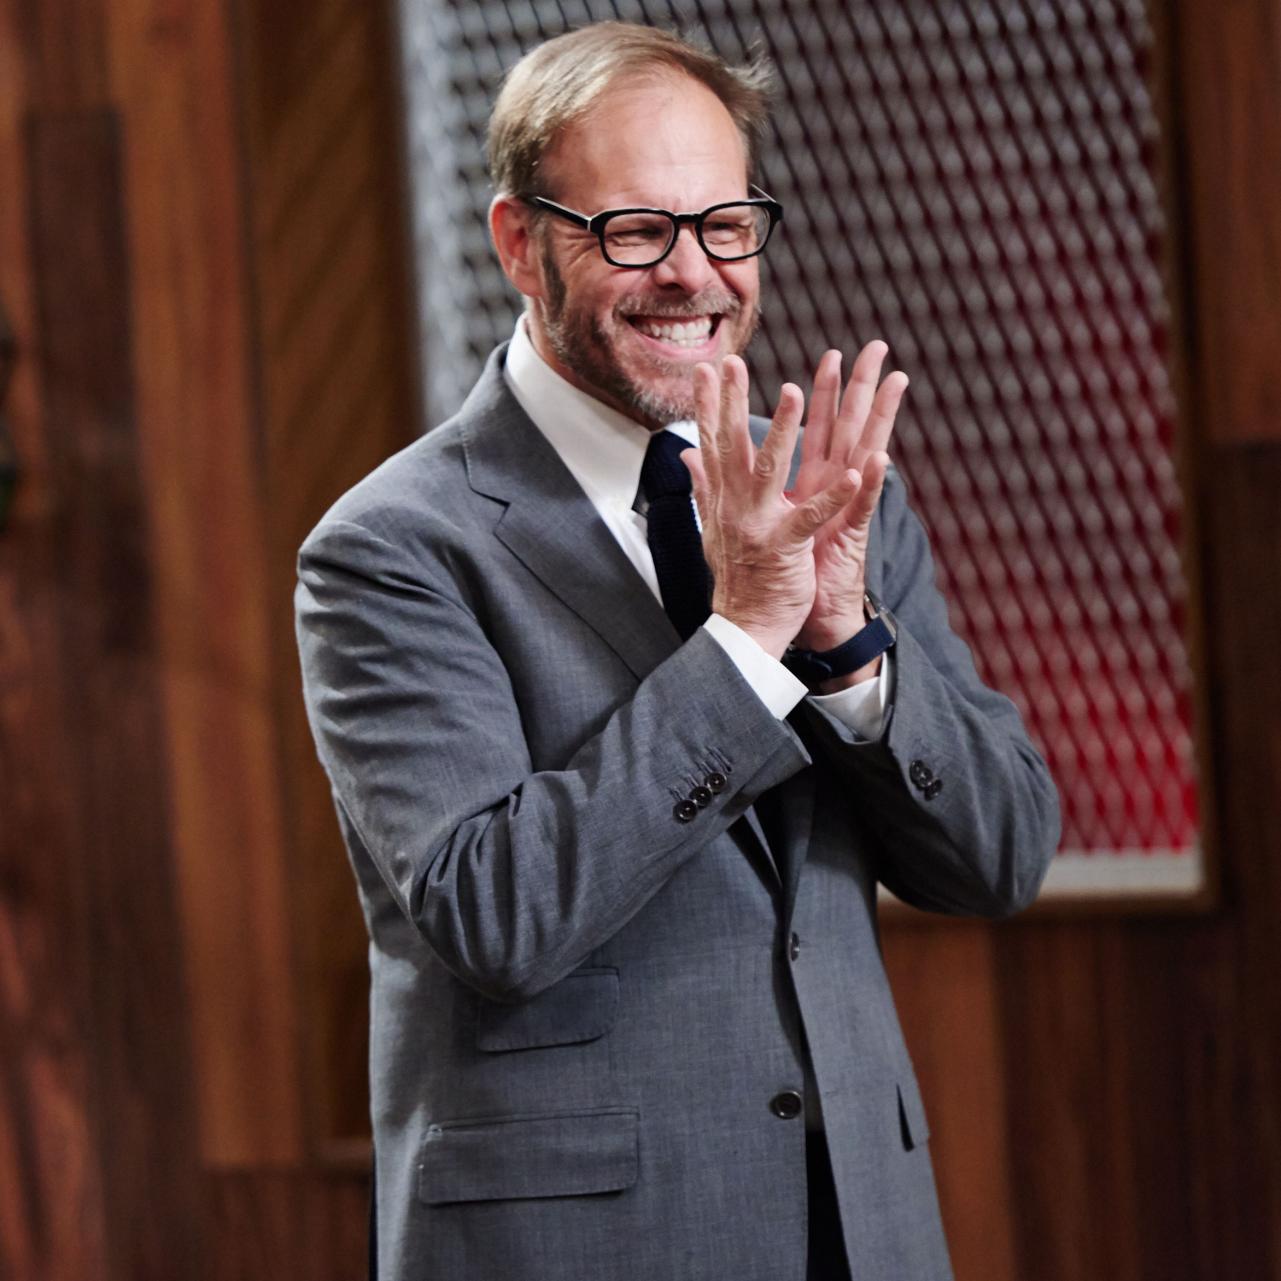 Watch Alton Brown review absolutely awful kitchen gadgets